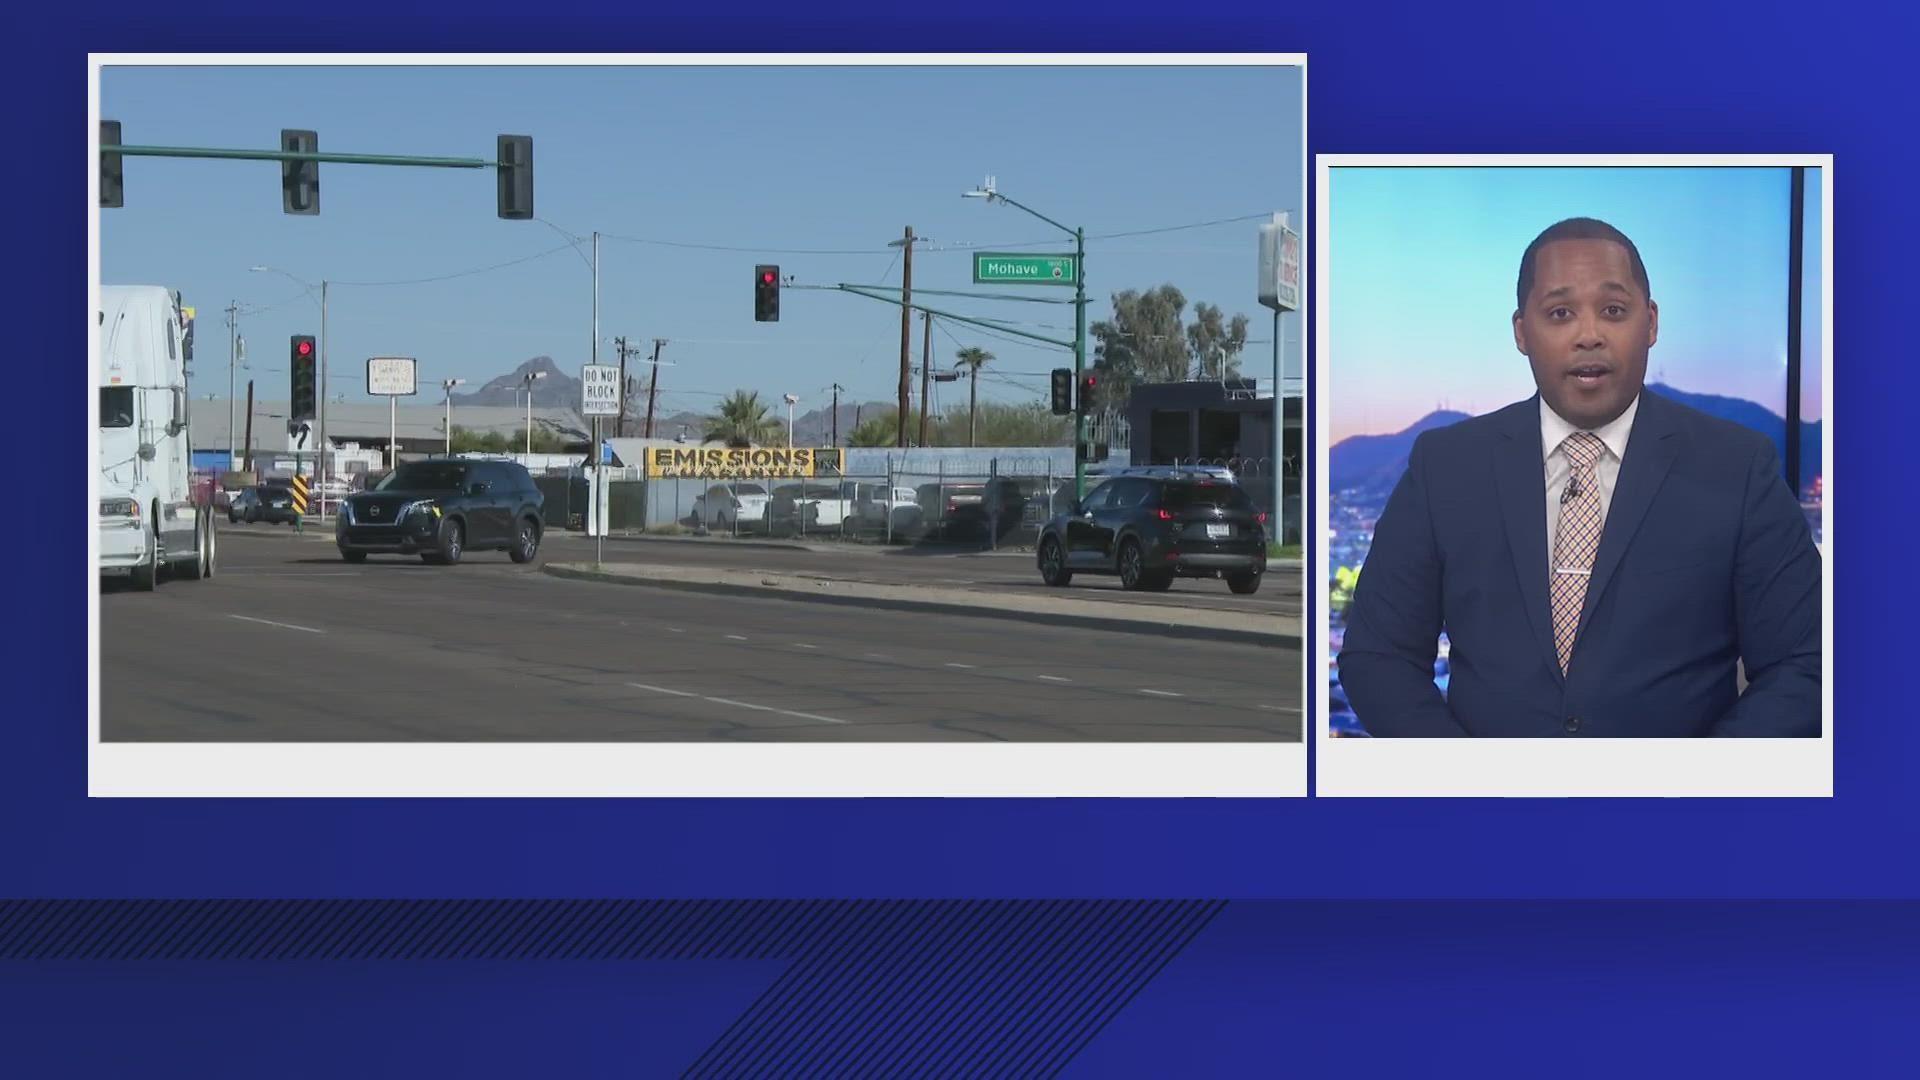 Police said that the man was struck near 7th and Mohave streets and later died at a local hospital